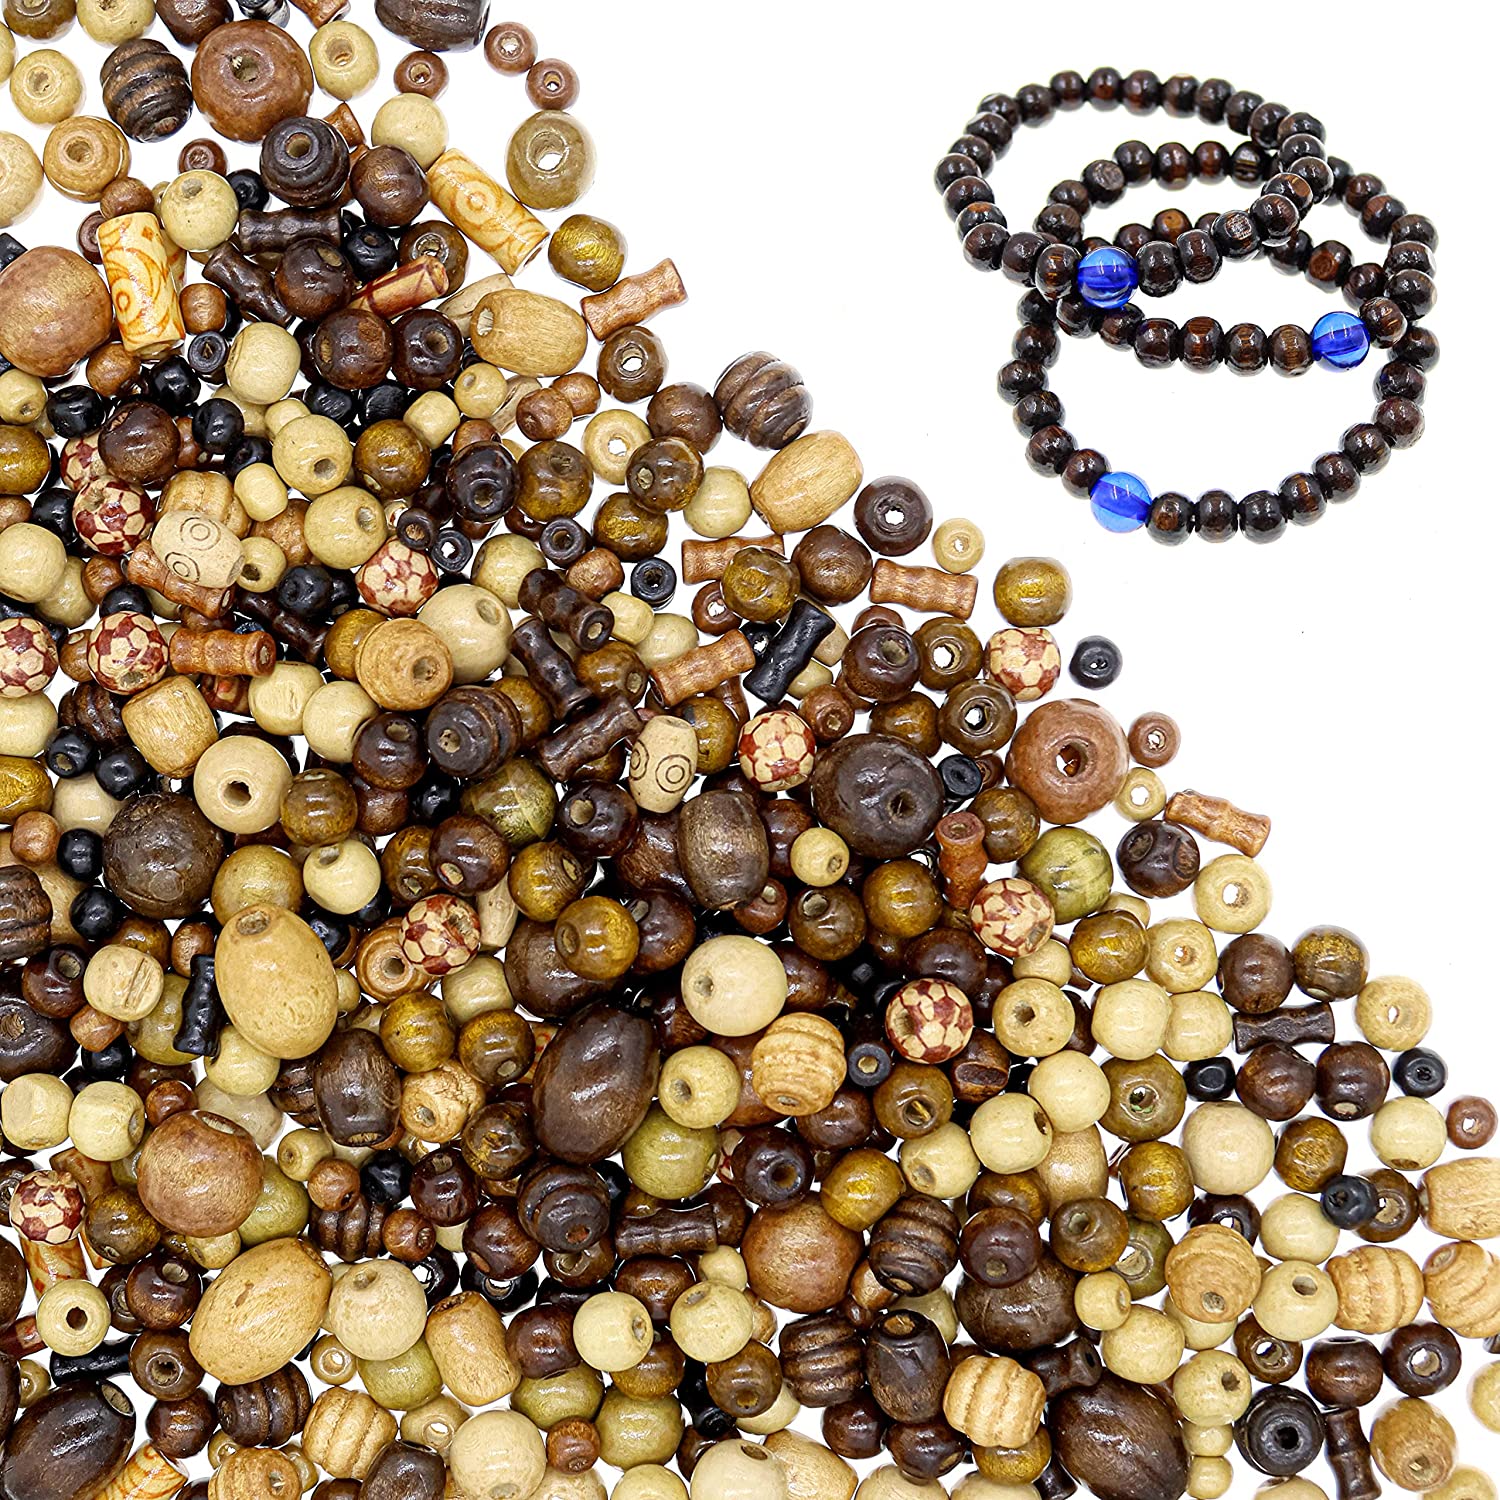 Fun-Weevz 700 PCS Wooden Beads for Jewelry Making Adults, Assorted African  Beads, Macrame Supplies Round Beads, Craft Wood Beads for Bracelets and Necklace  Jewelry